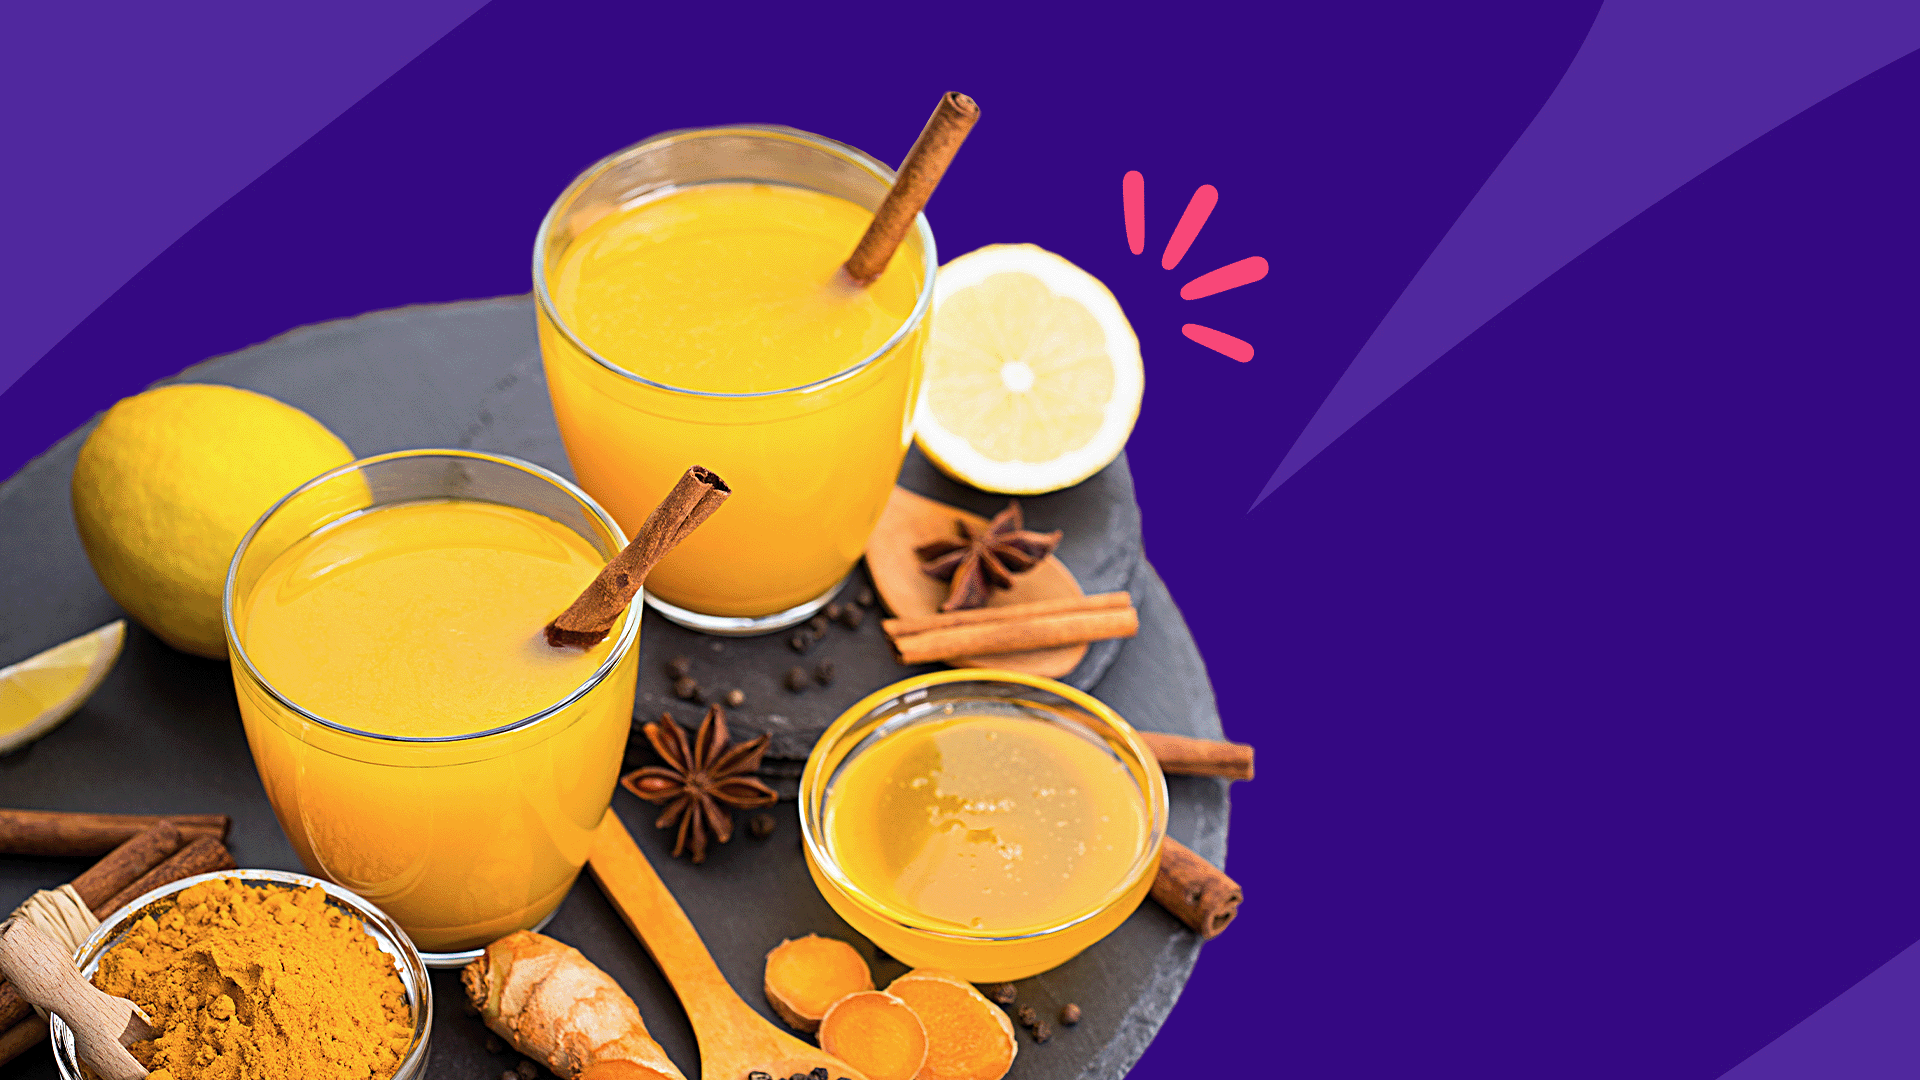 Drinks with turmeric in them represent turmeric benefits